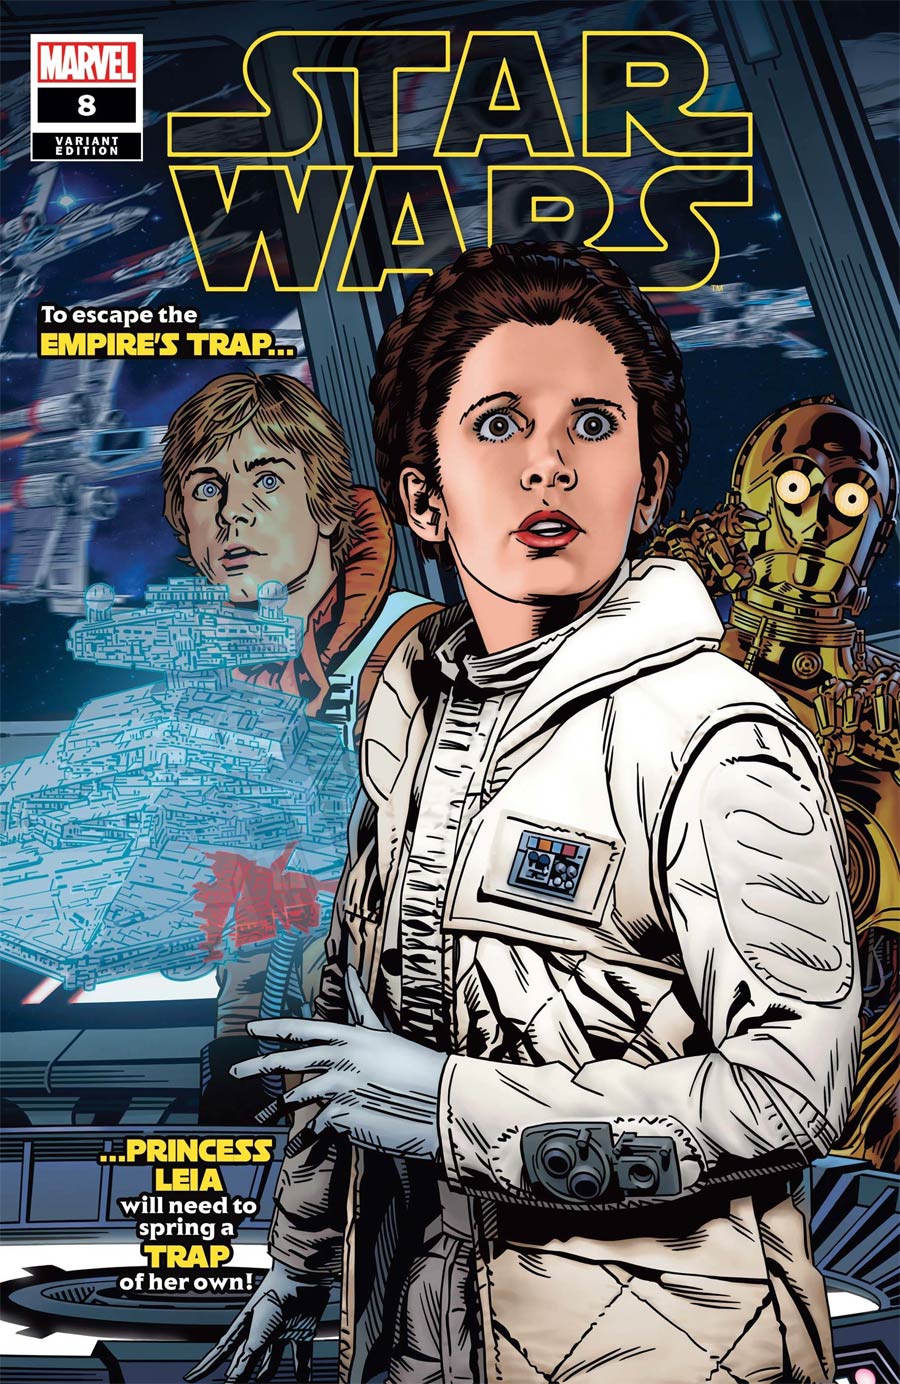 Star Wars Vol 5 #8 Cover D Incentive Michael Golden Variant Cover